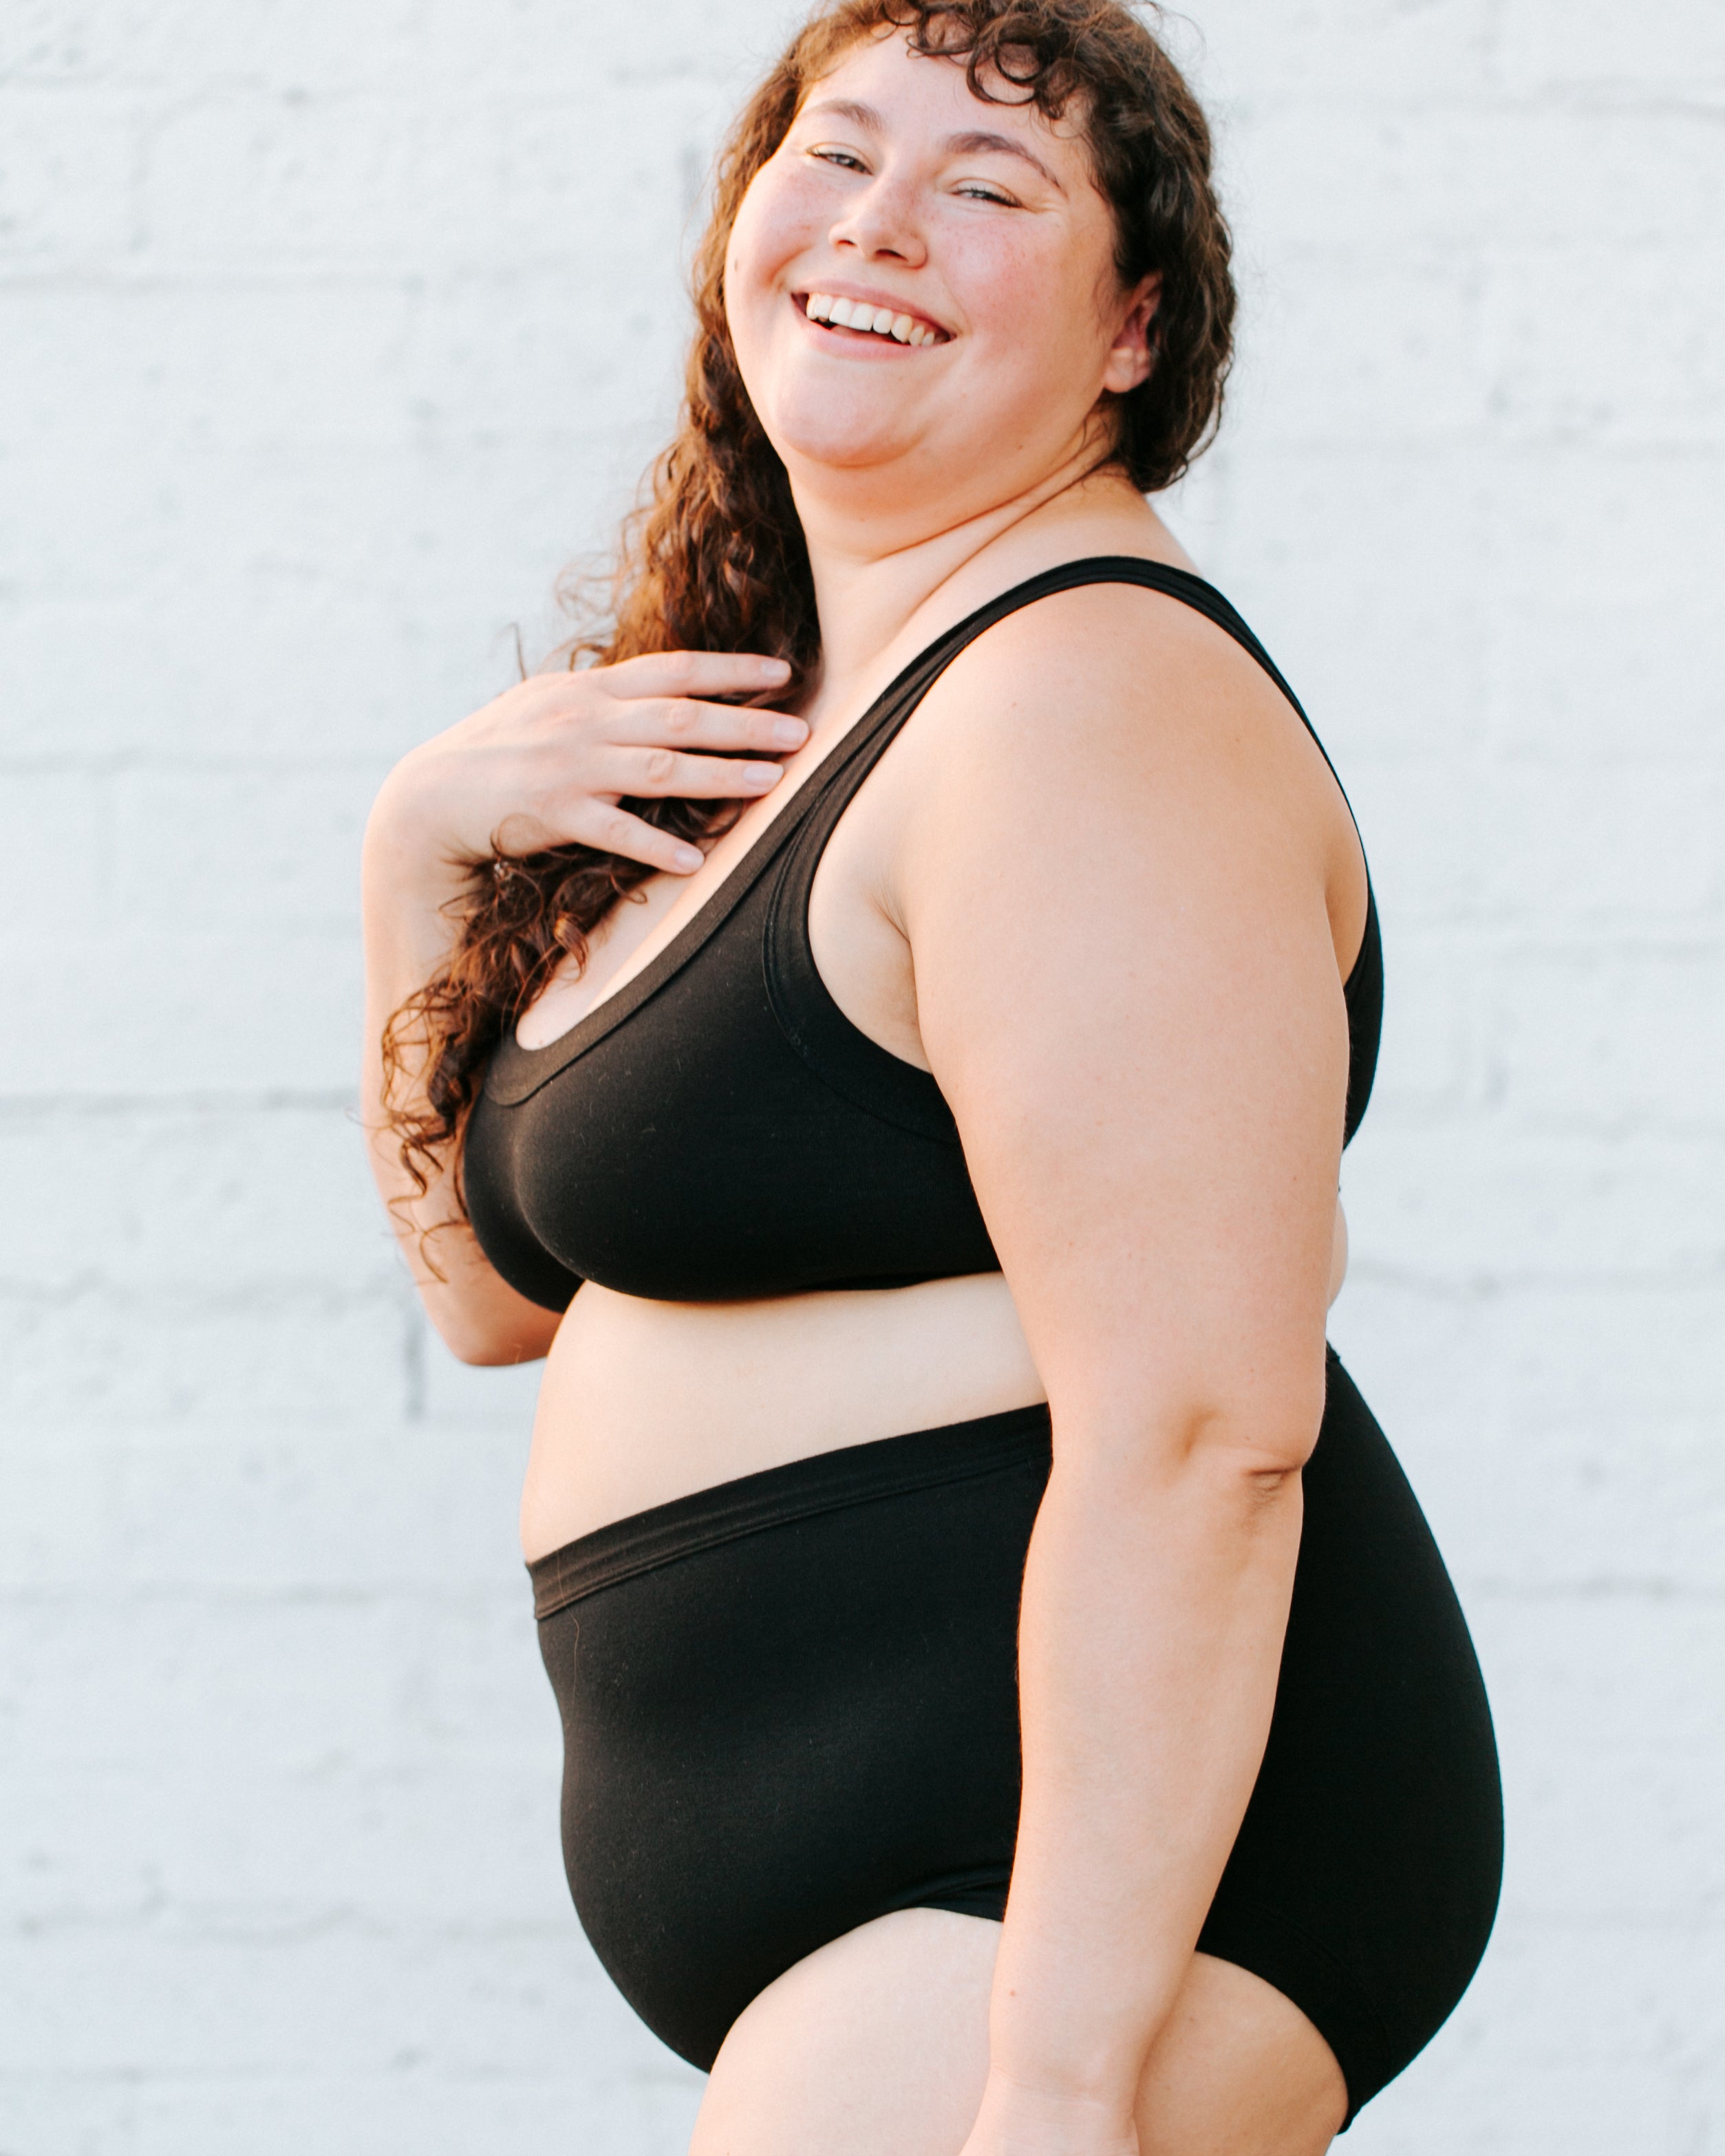 Plus sized model smiling into the camera wearing Original style plain black underwear and Bralette set.